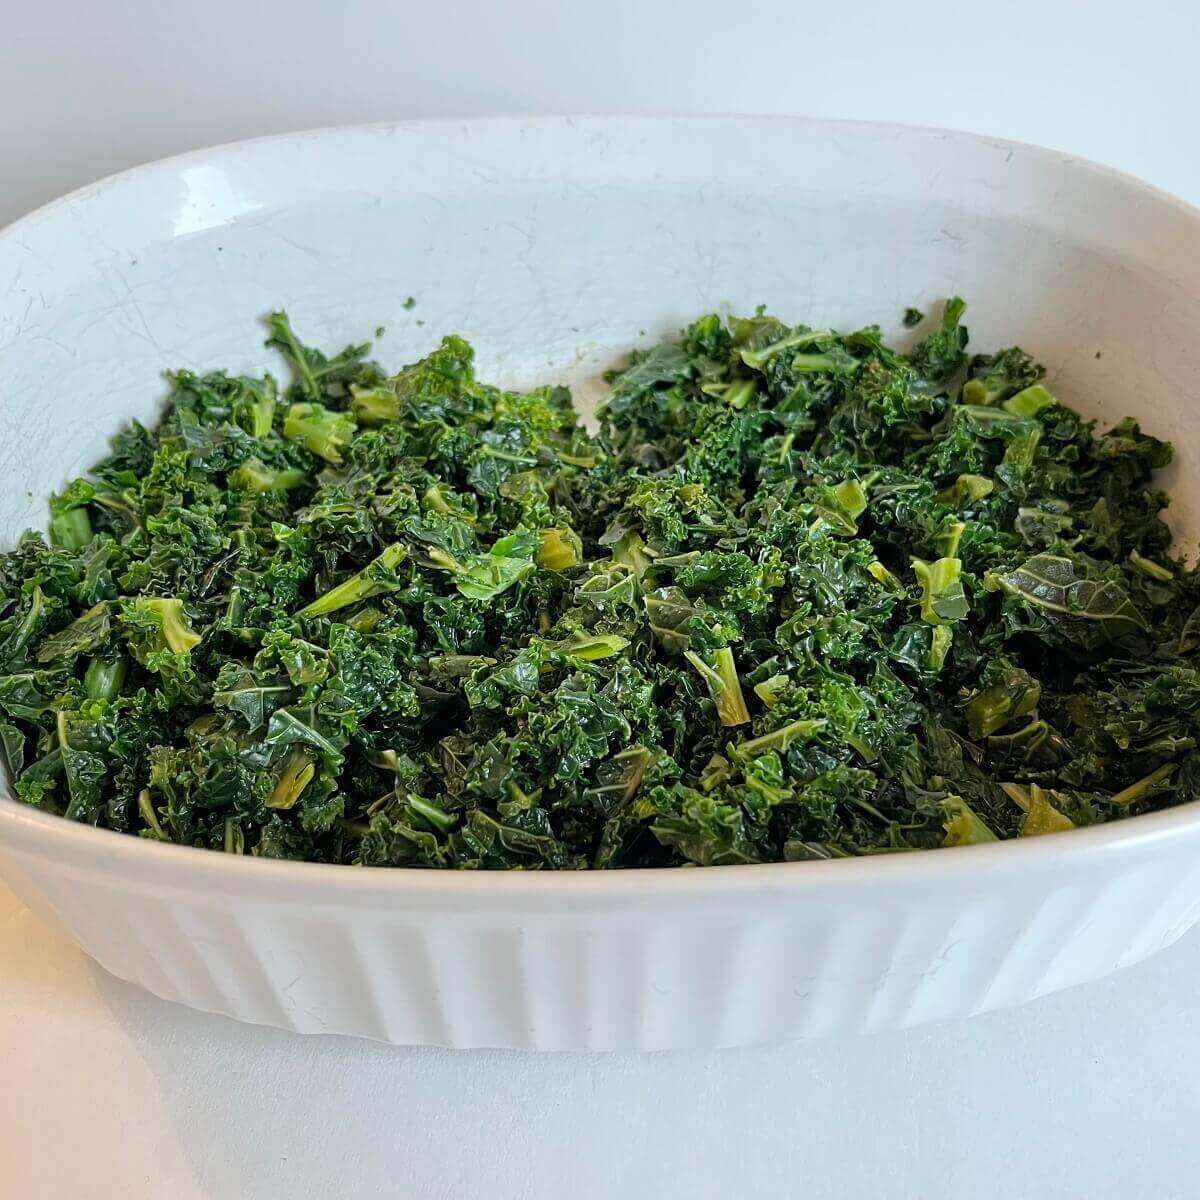 Cooked chopped kale in a white baking dish.